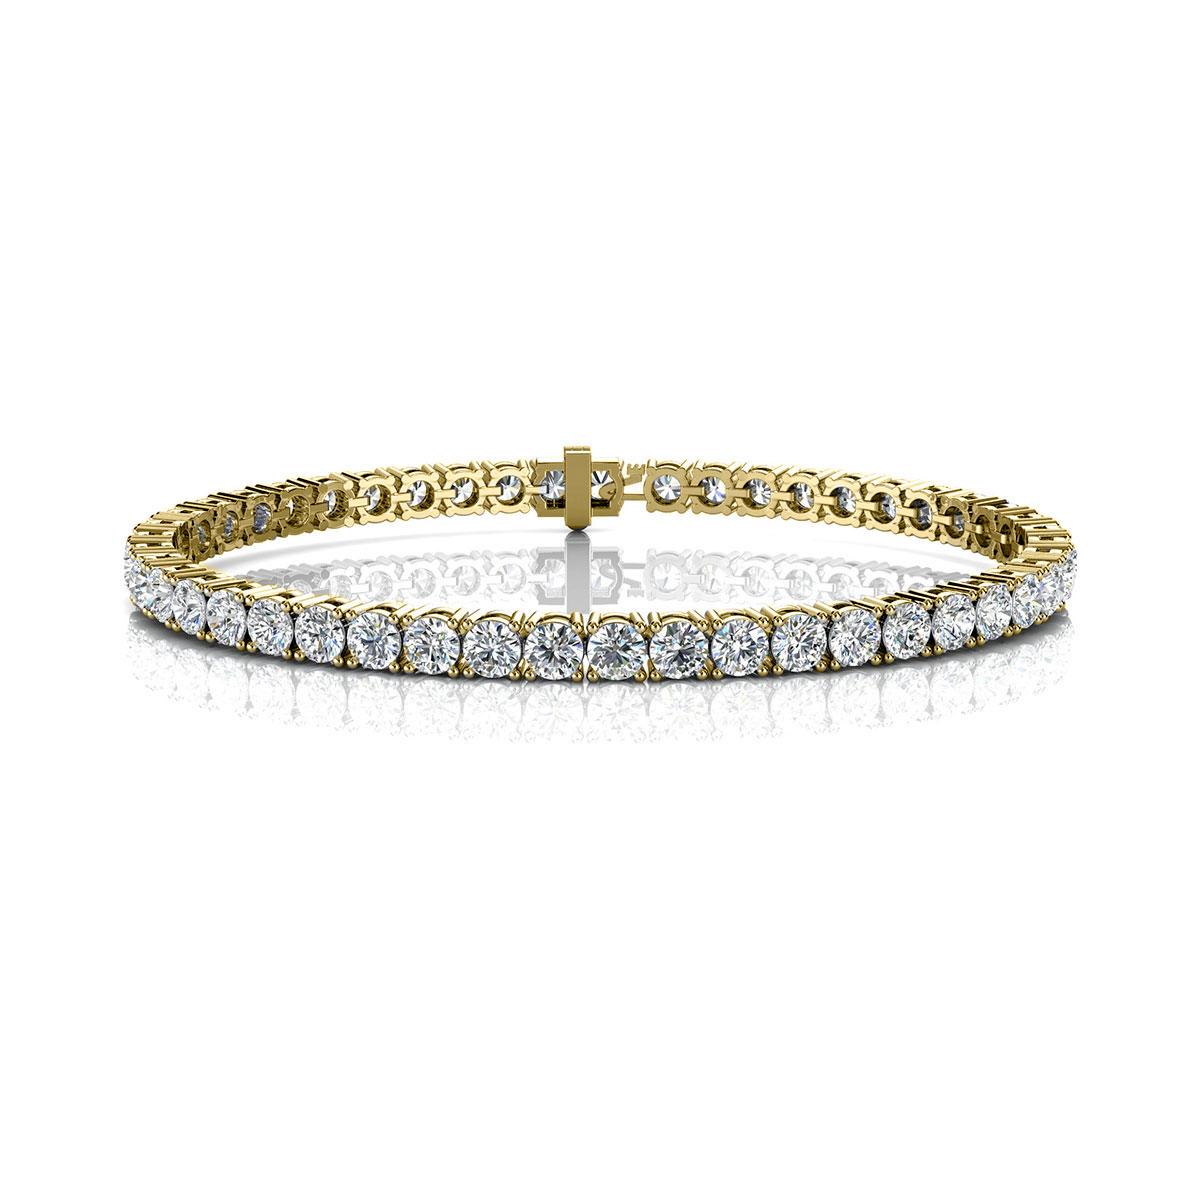 A timeless four prongs diamonds tennis bracelet. Experience the Difference!

Product details: 

Center Gemstone Type: NATURAL DIAMOND
Center Gemstone Color: WHITE
Center Gemstone Shape: ROUND
Center Diamond Carat Weight: 7
Metal: 18K Yellow